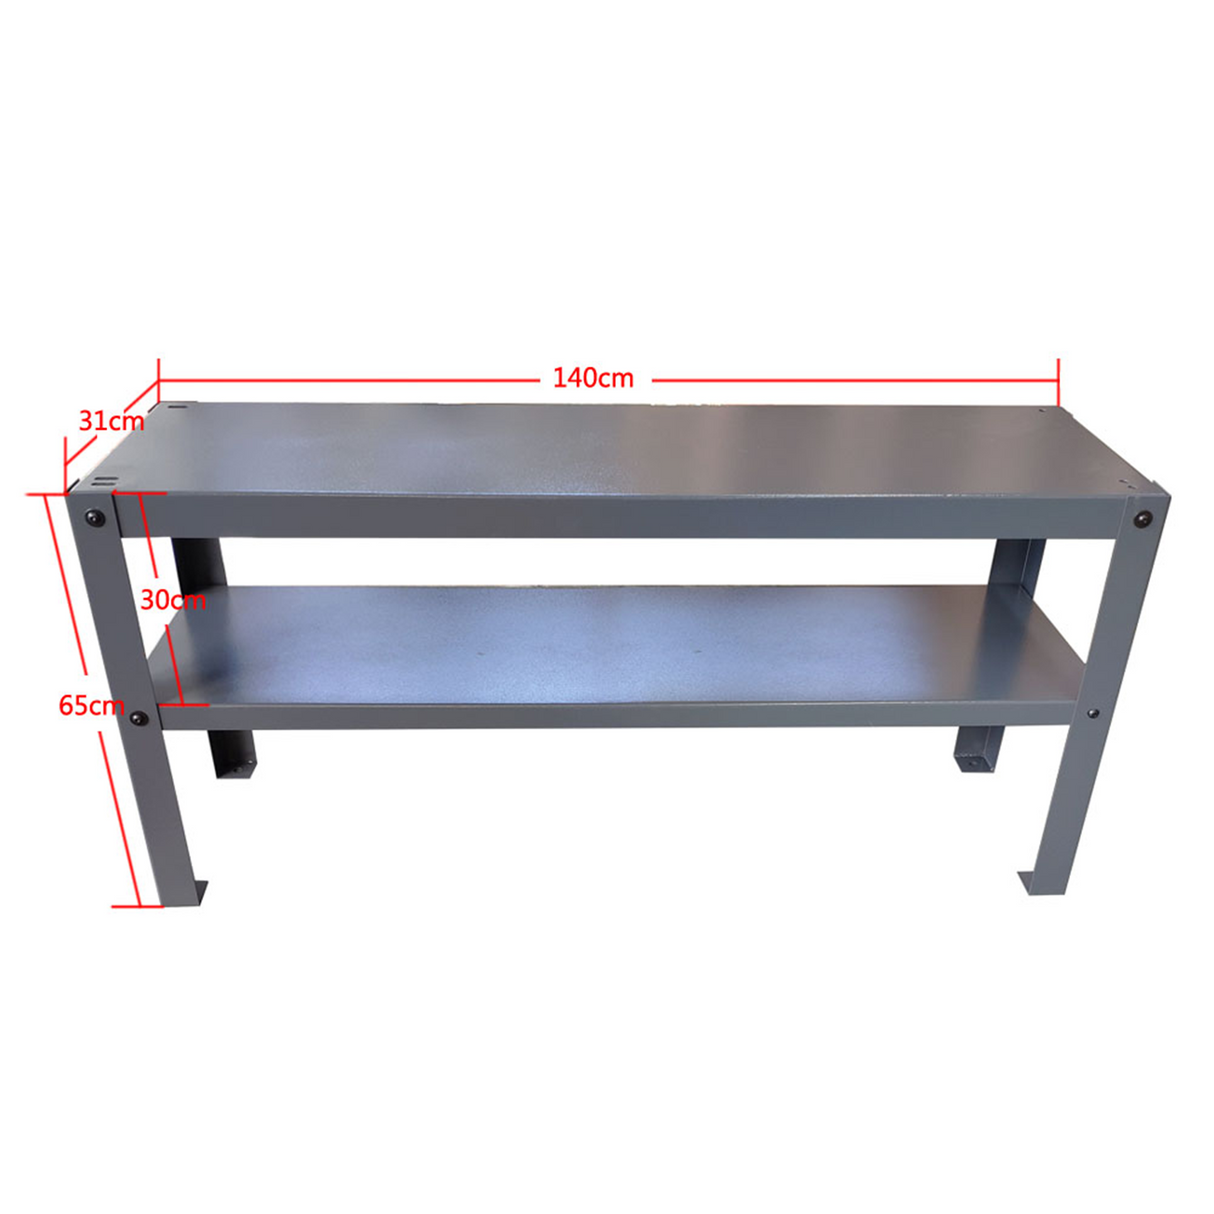 Kang Industrial A type Stand for Plate Rolling W01-5116